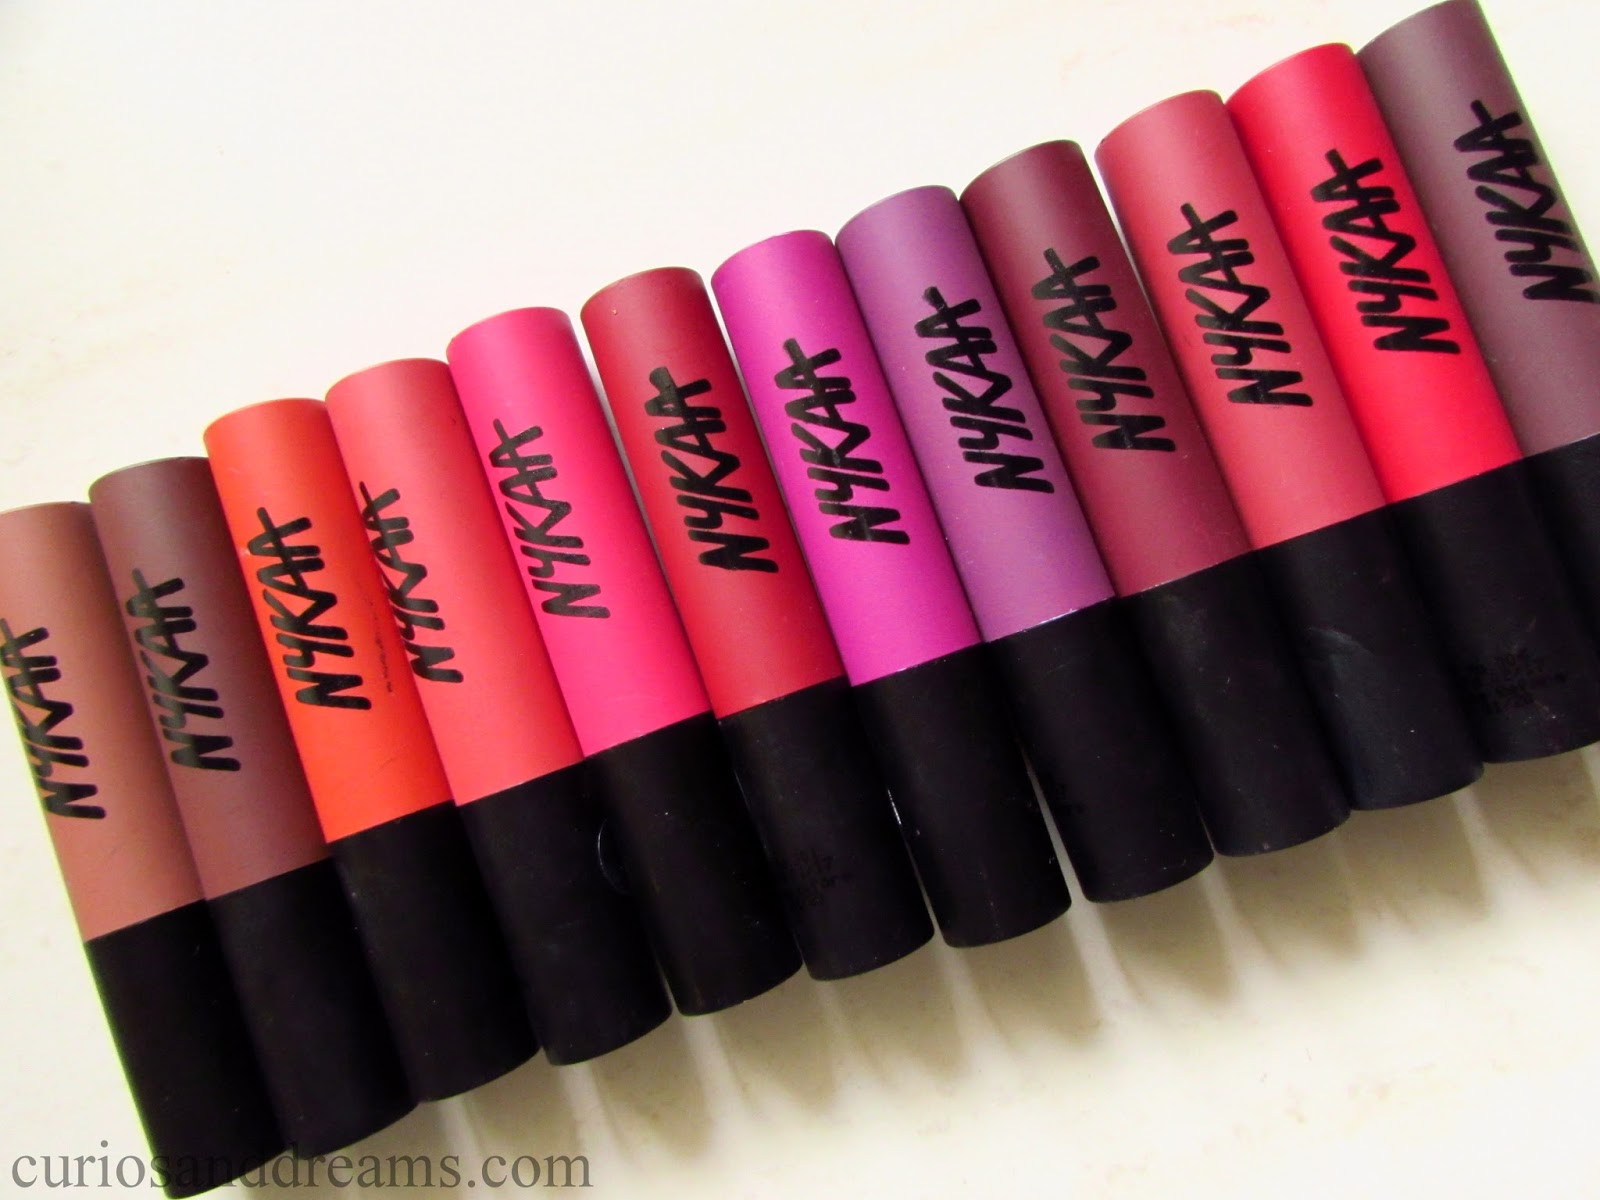 Nykaa Paintstix Review | Swatches of all 12 shades - The 